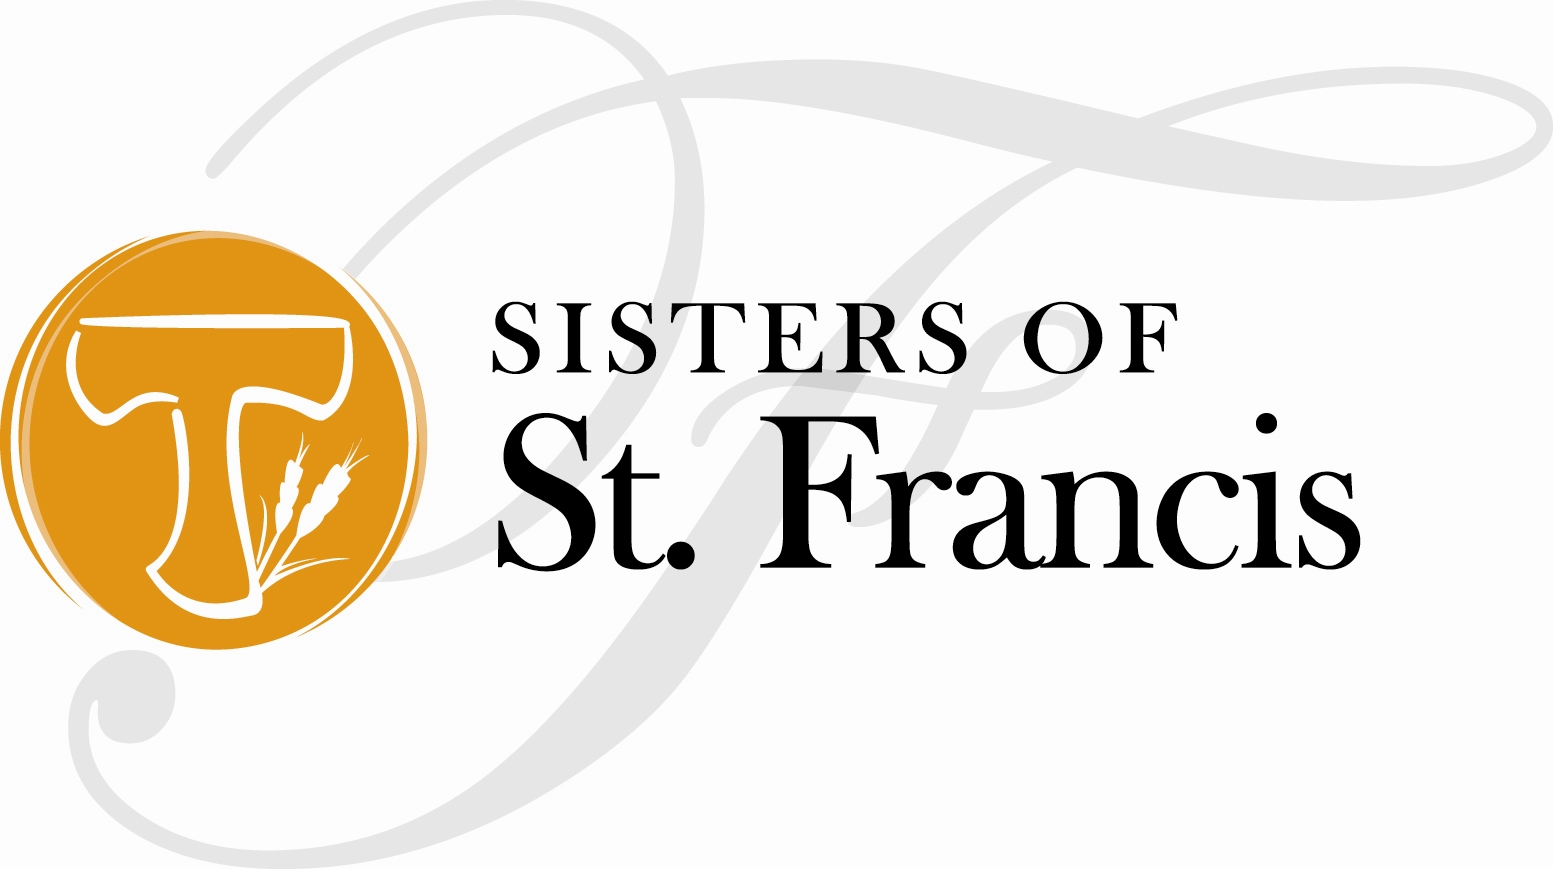 Sisters of St. Francis